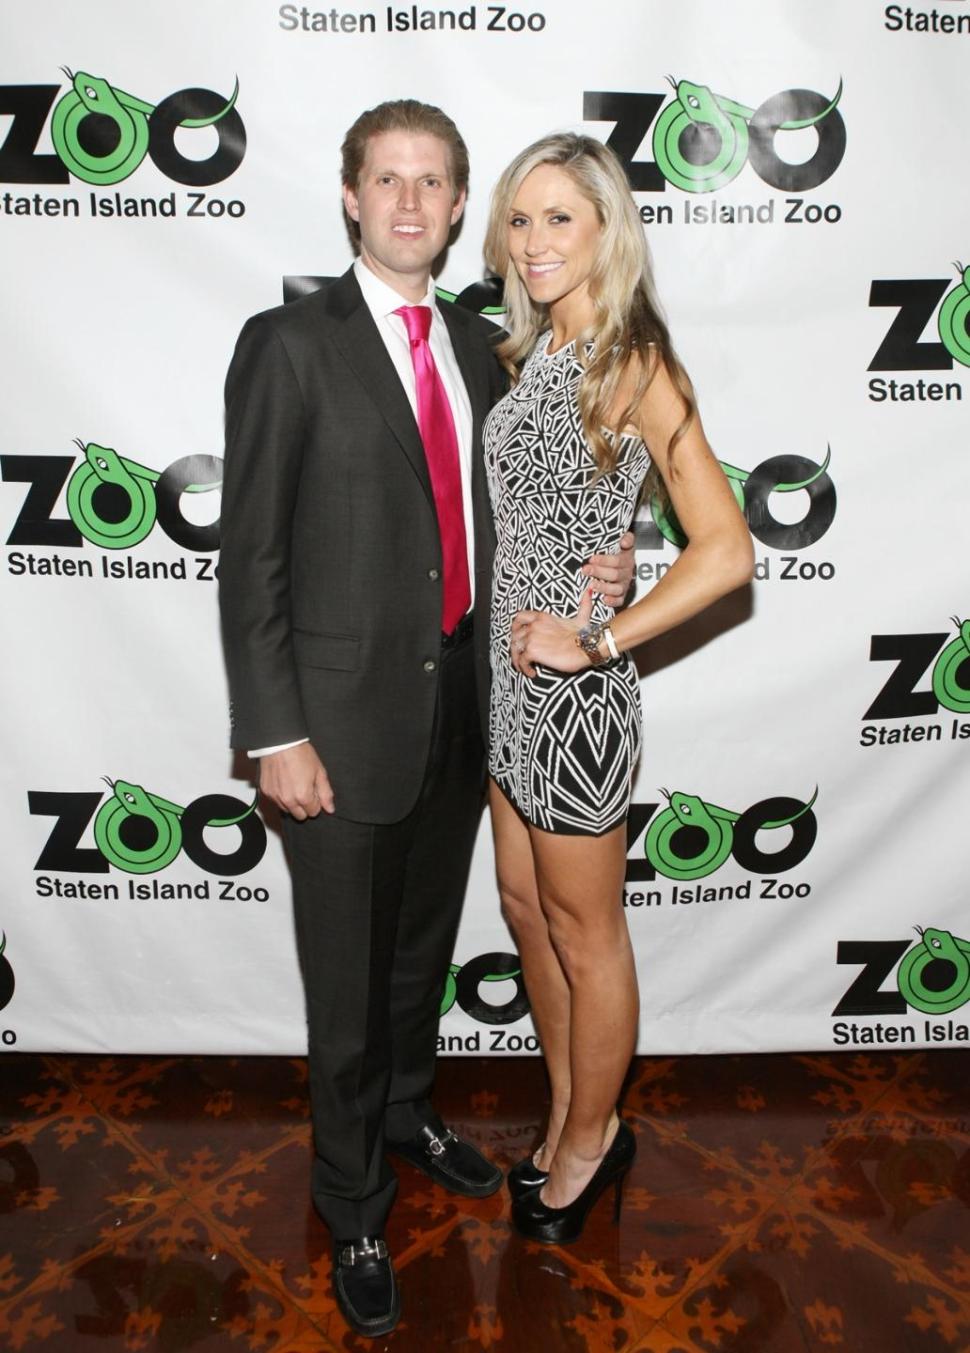 Eric Trump and Lara Yunaska attend the 2013 Staten Island Zoological Society Ball at Richmond Country Club on April 11, 2013 in the Staten Island burough of New York City.